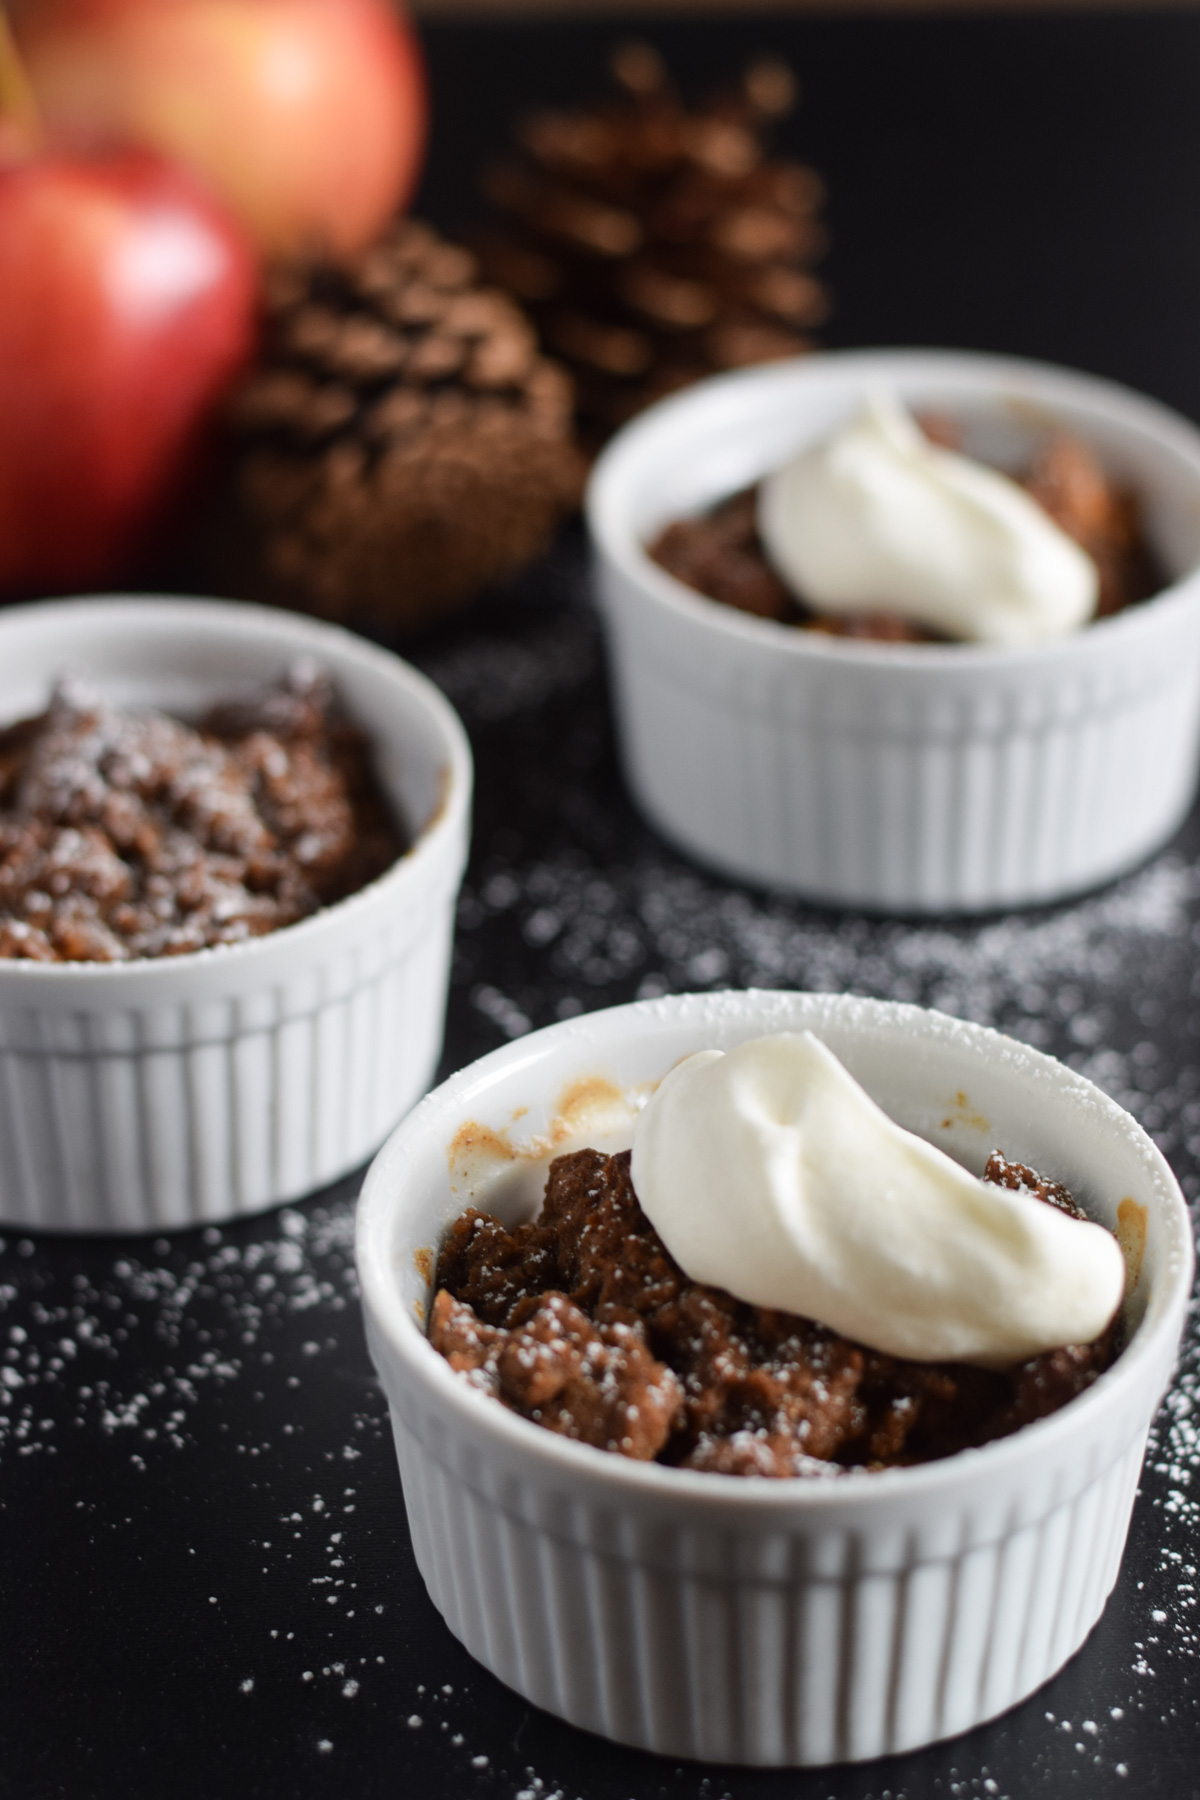 Gingerbread apple crumble